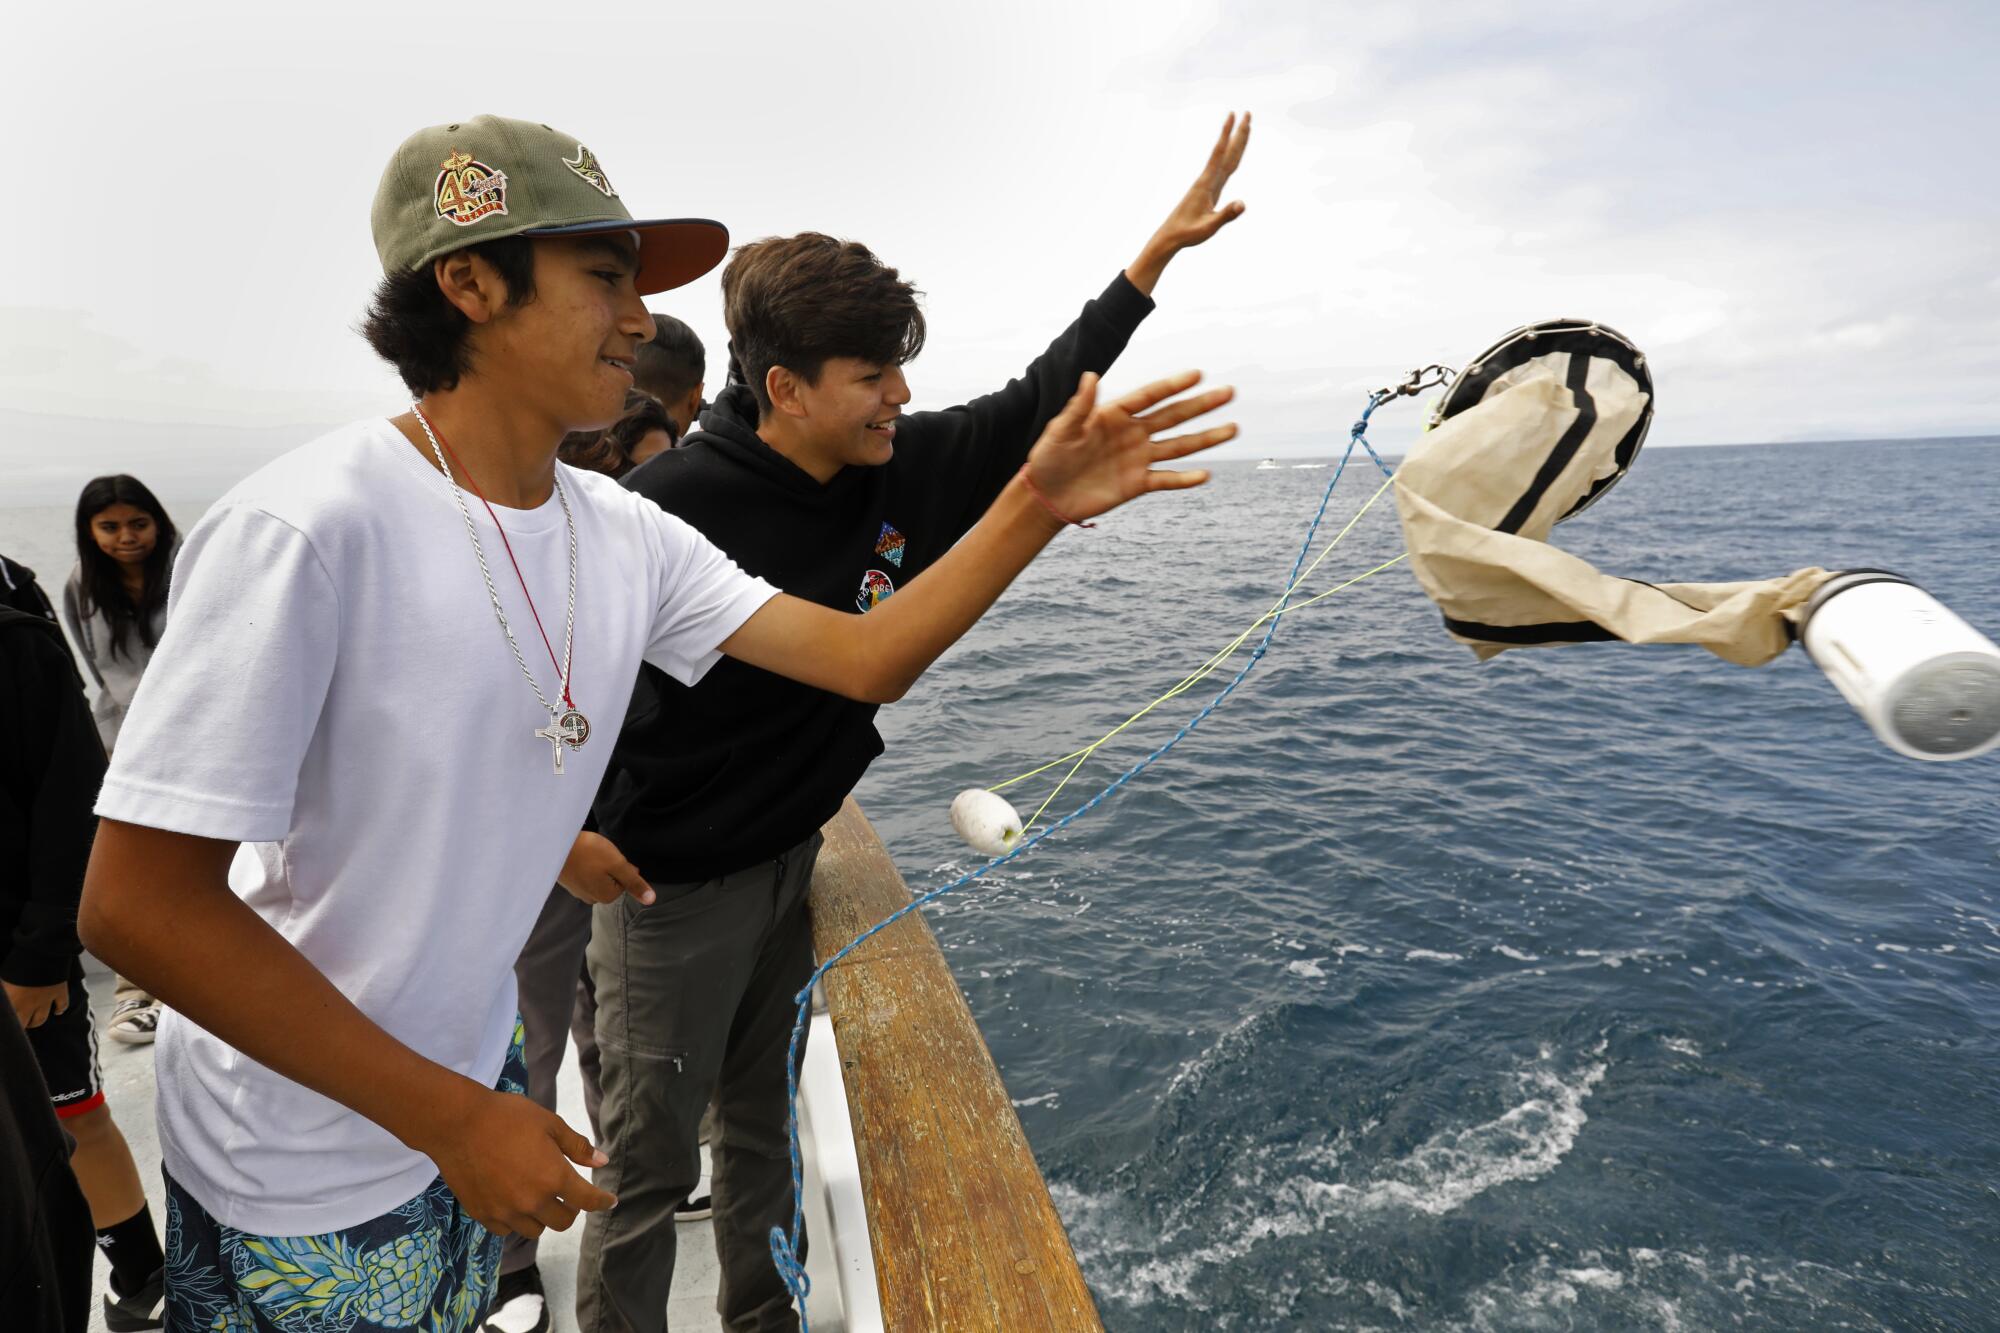 Two boys throw a net off the side of a boat in the ocean.